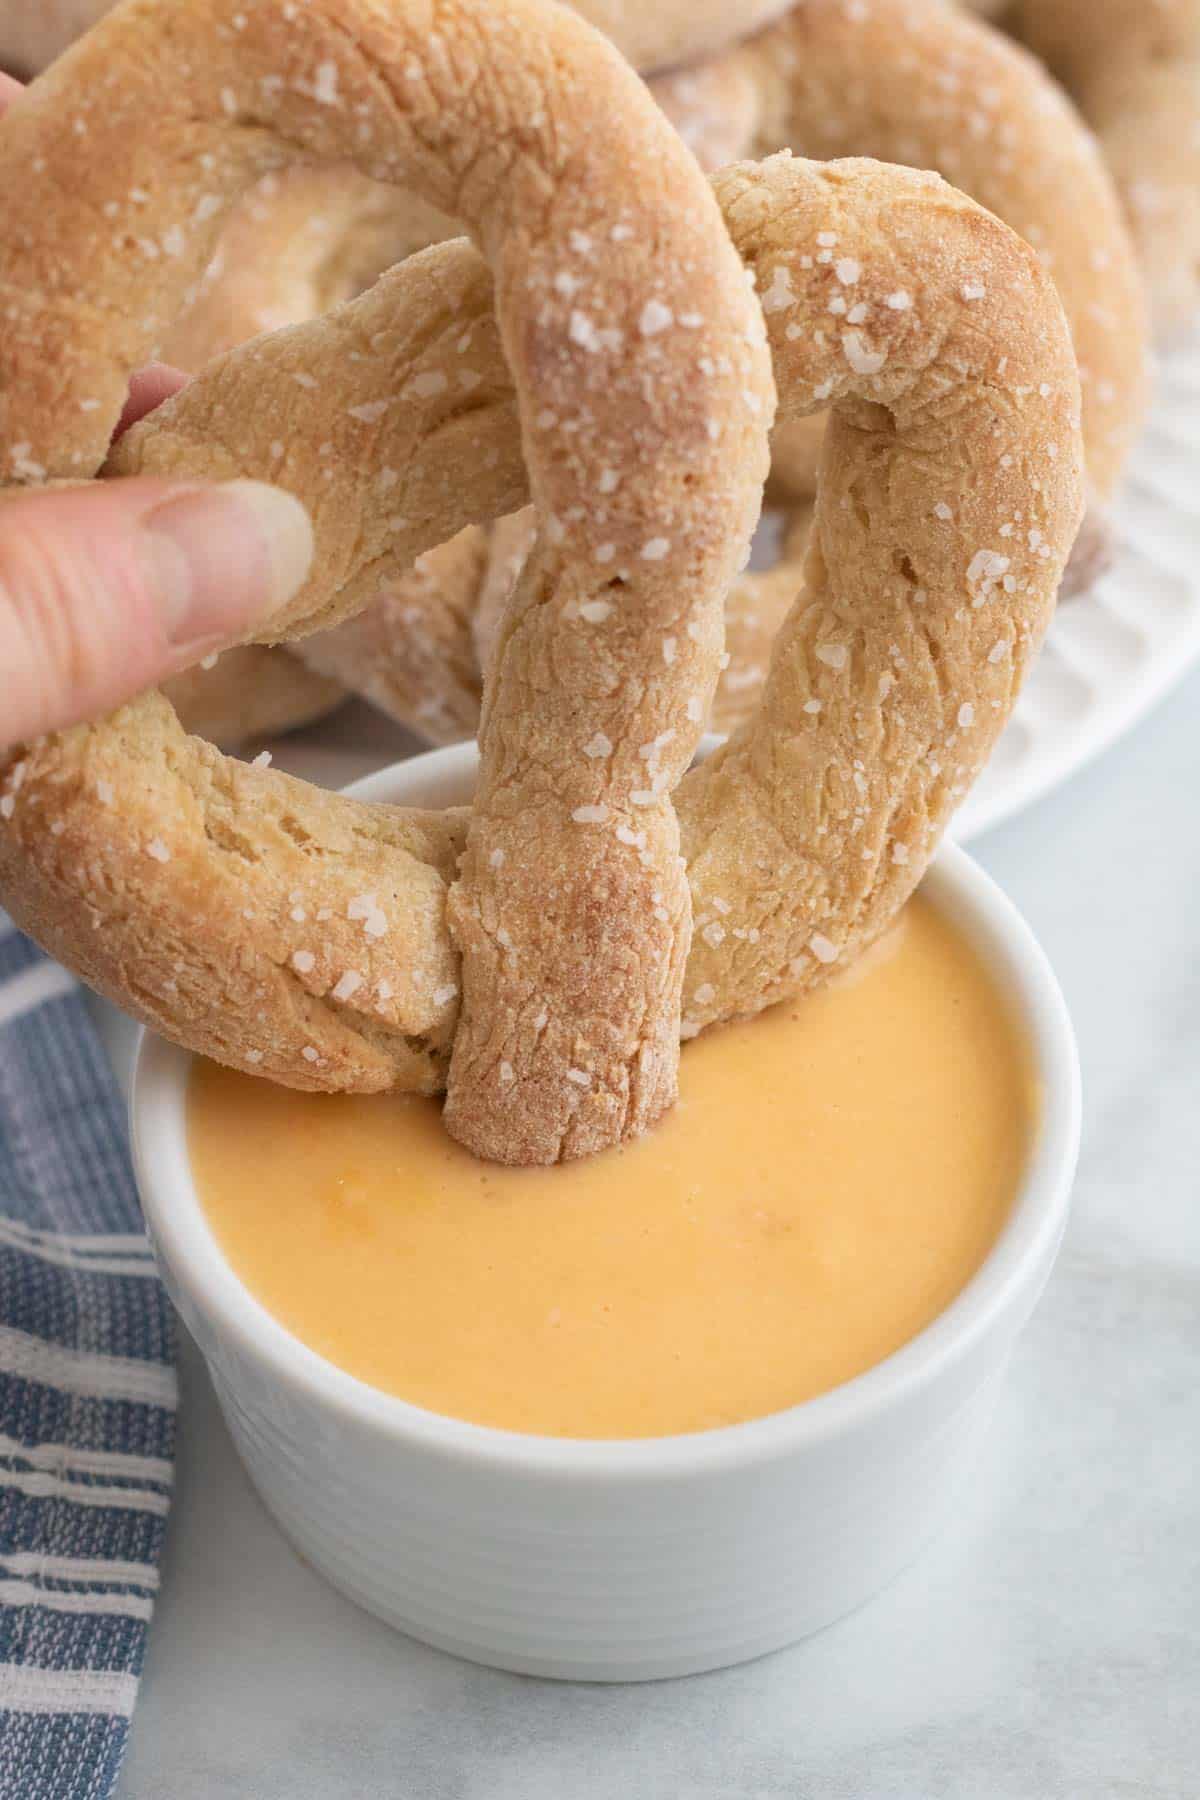 A homemade gluten free pretzel is dipped into cheese sauce.